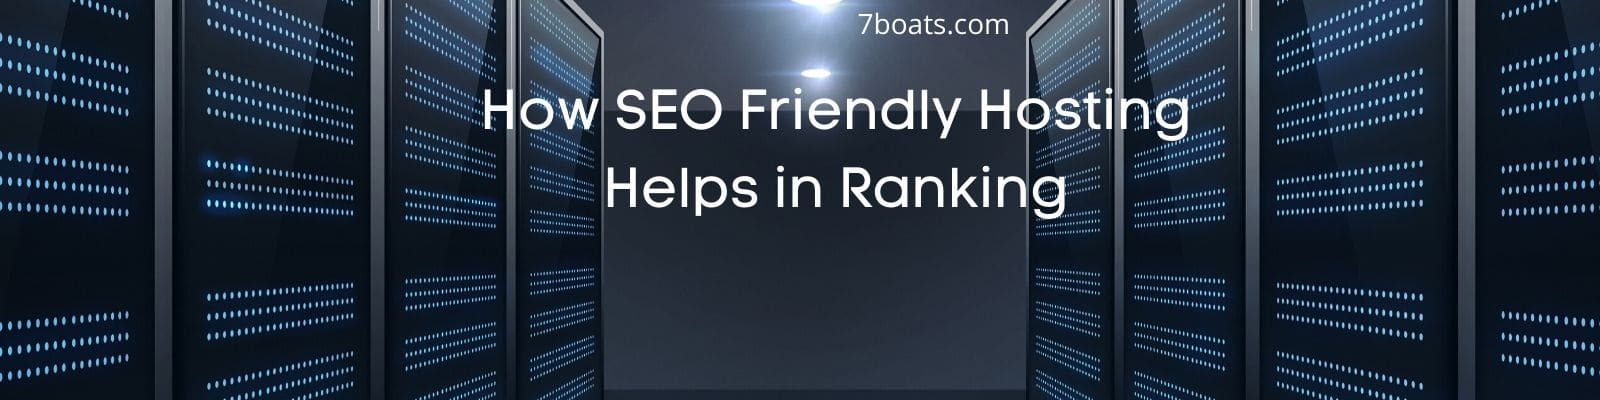 How To Select Right SEO Friendly Hosting for Better Search Rankings – How Web Hosting plays crucial role in SEO & ranking